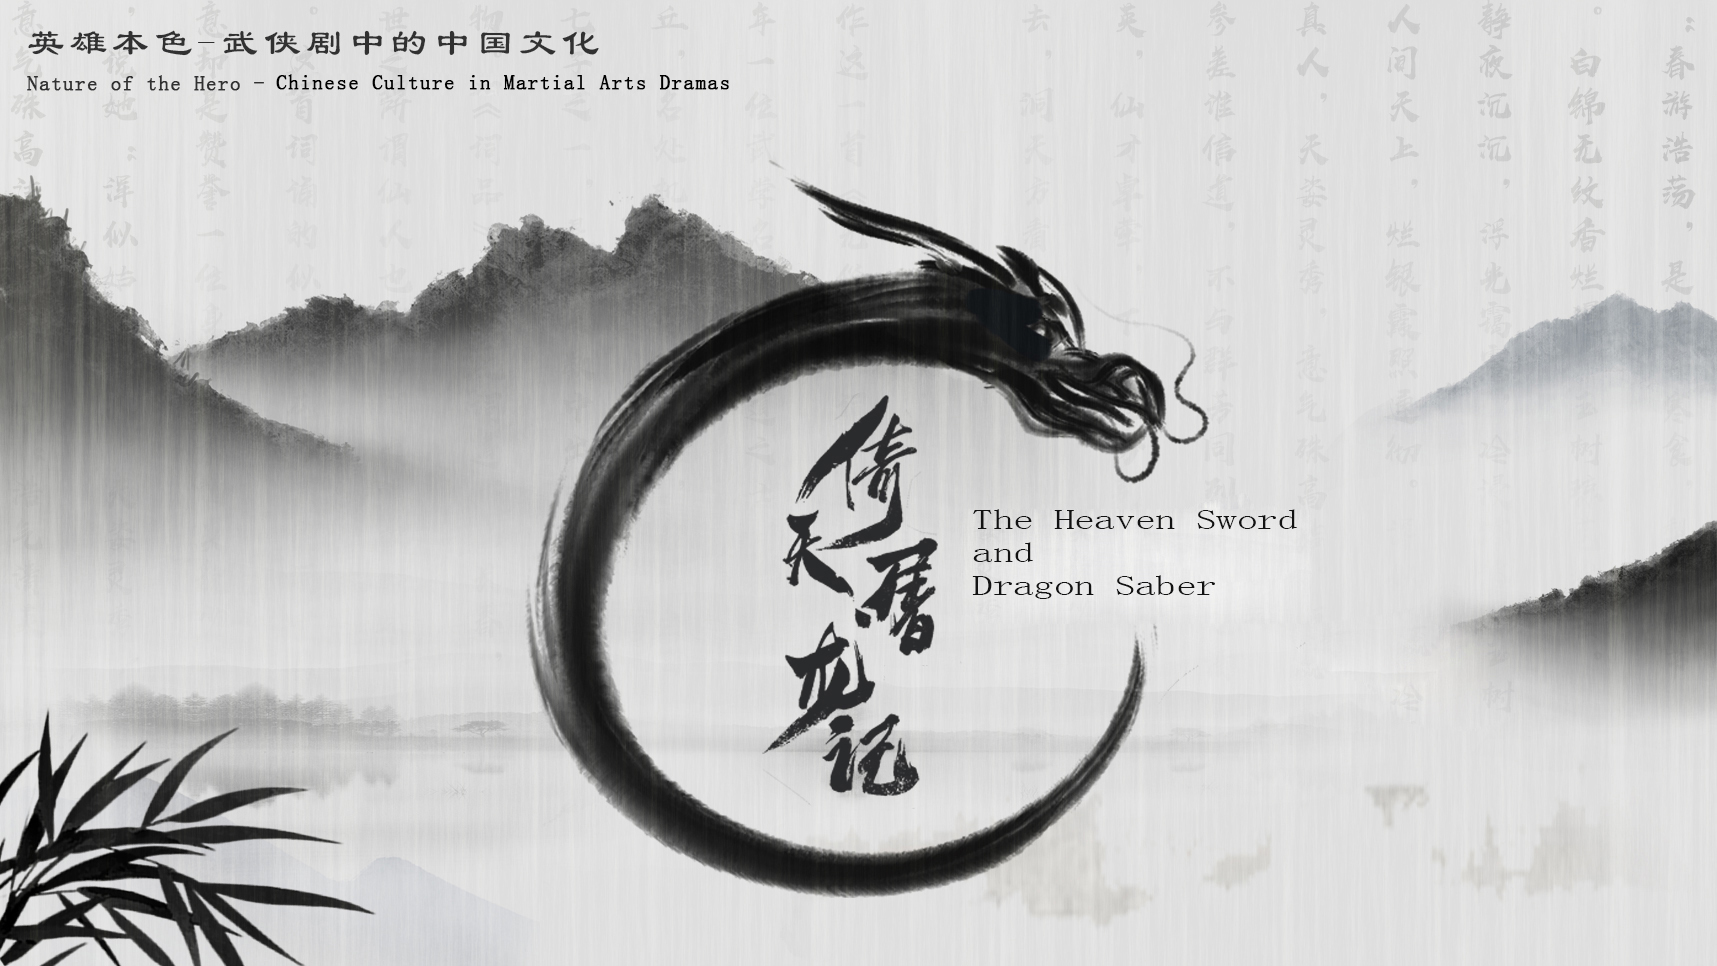 Nature of the Hero - Chinese Culture in Martial Arts Dramas: Explanation of relevant cultural contents of The Heaven Sword and Dragon Saber